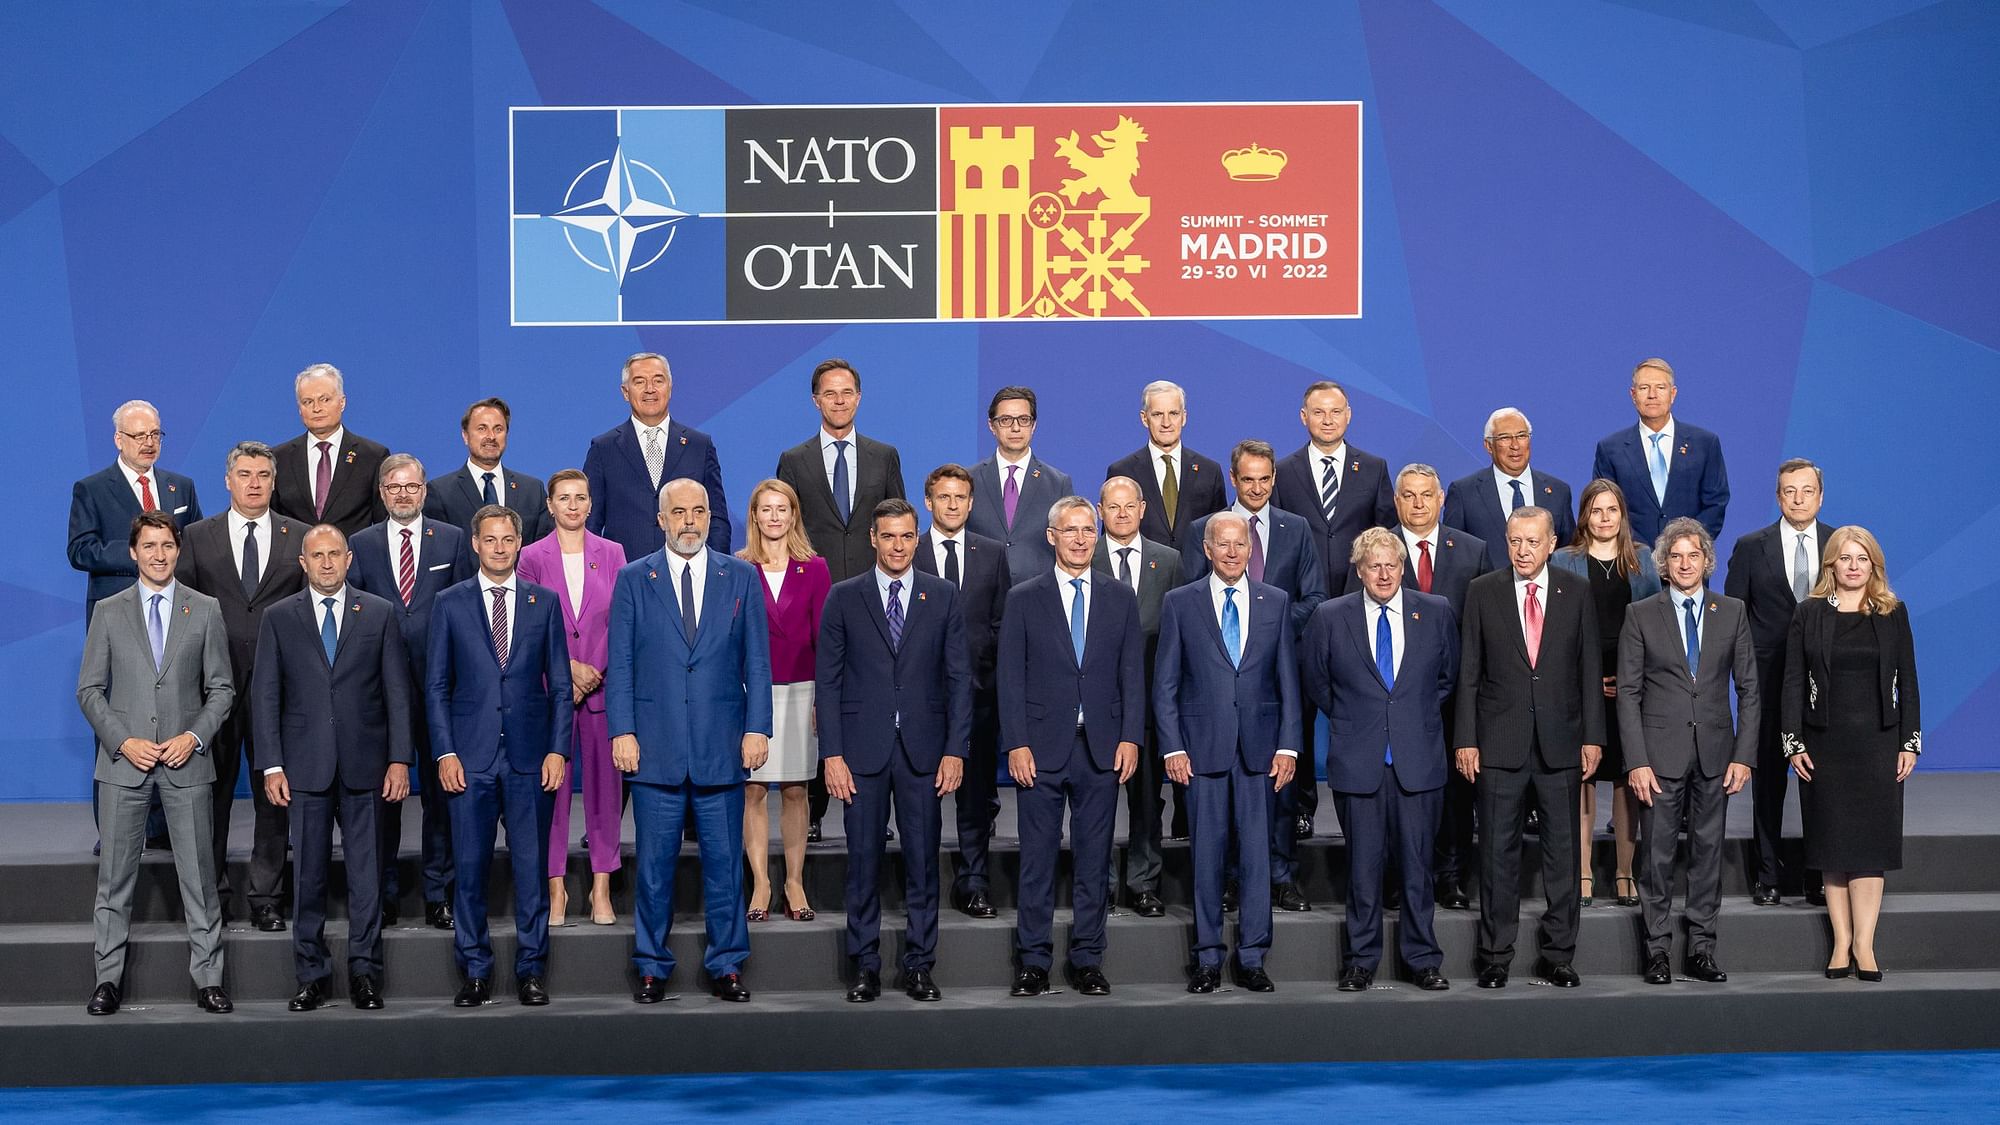 <div class="paragraphs"><p>At the Madrid Summit, leaders of the North Atlantic Treaty Organization (<a href="https://www.thequint.com/topic/nato">NATO</a>), on Wednesday, 29 June, agreed for the first time that <a href="https://www.thequint.com/topic/china">China</a> poses a threat to the "rules-based international order."</p></div>